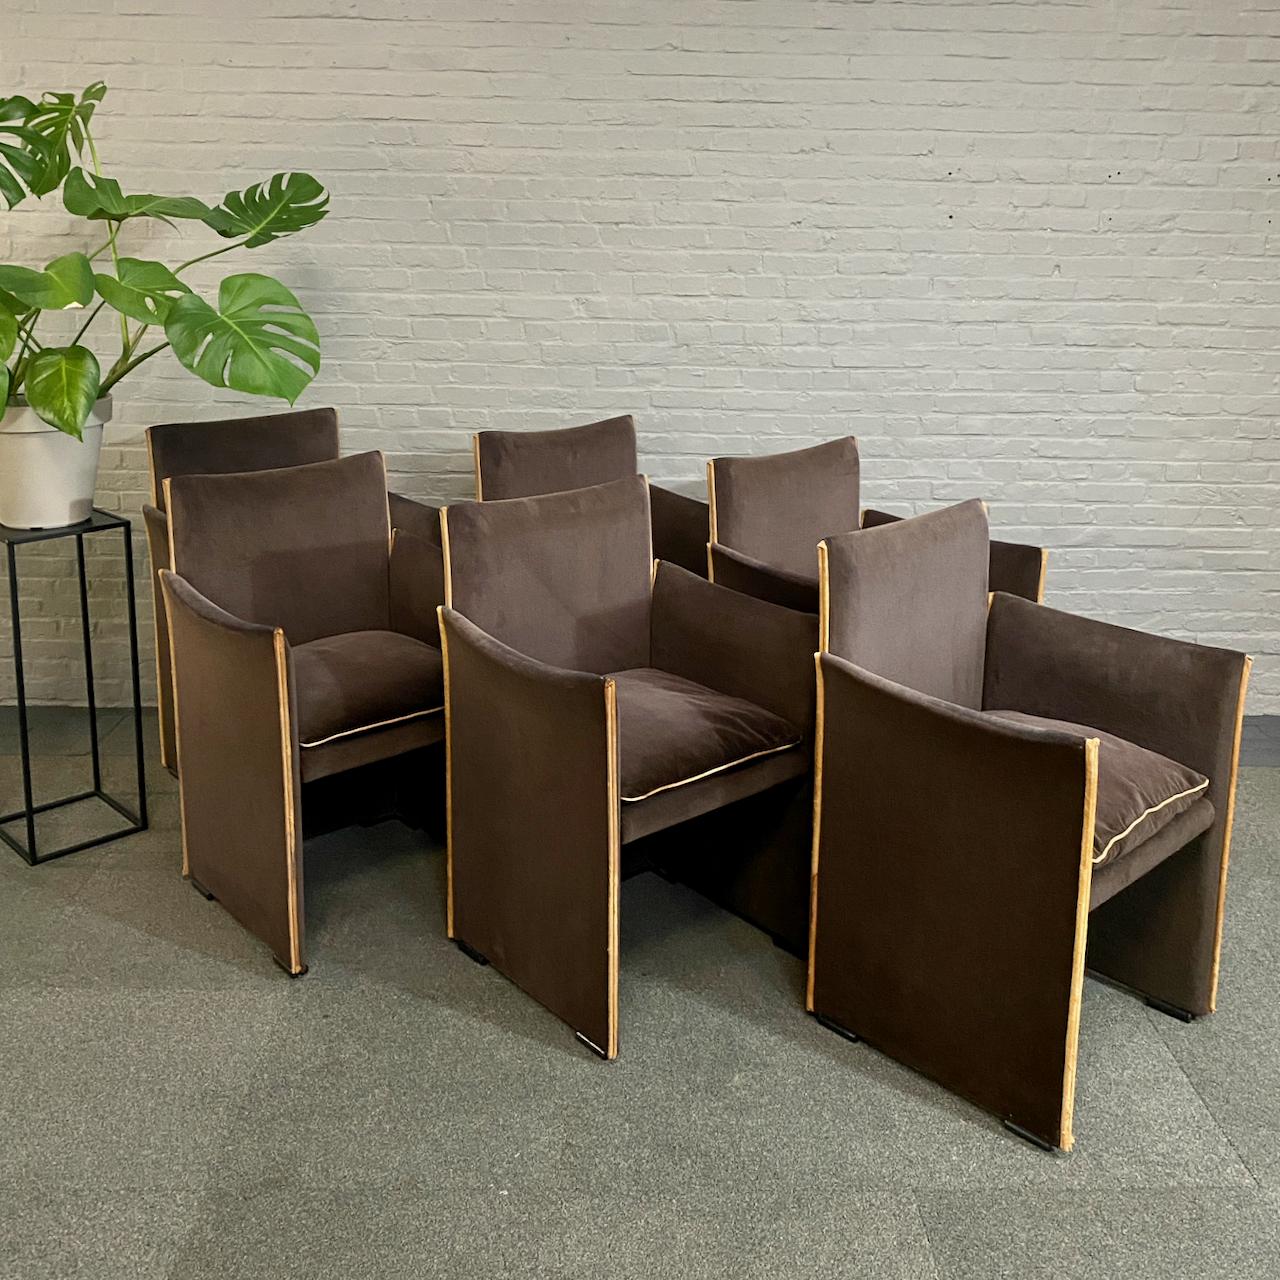 SET OF 6 MARIO BELLINI 401 BREAK CHAIRS FOR CASSINA - ITALY 1970'S

Set of 6 dining chairs designed by Mario Bellini for Cassina the 401 break.
Fabric is soft aubergine/brown velvet with natural leather trim and black zippers.
Production is probably